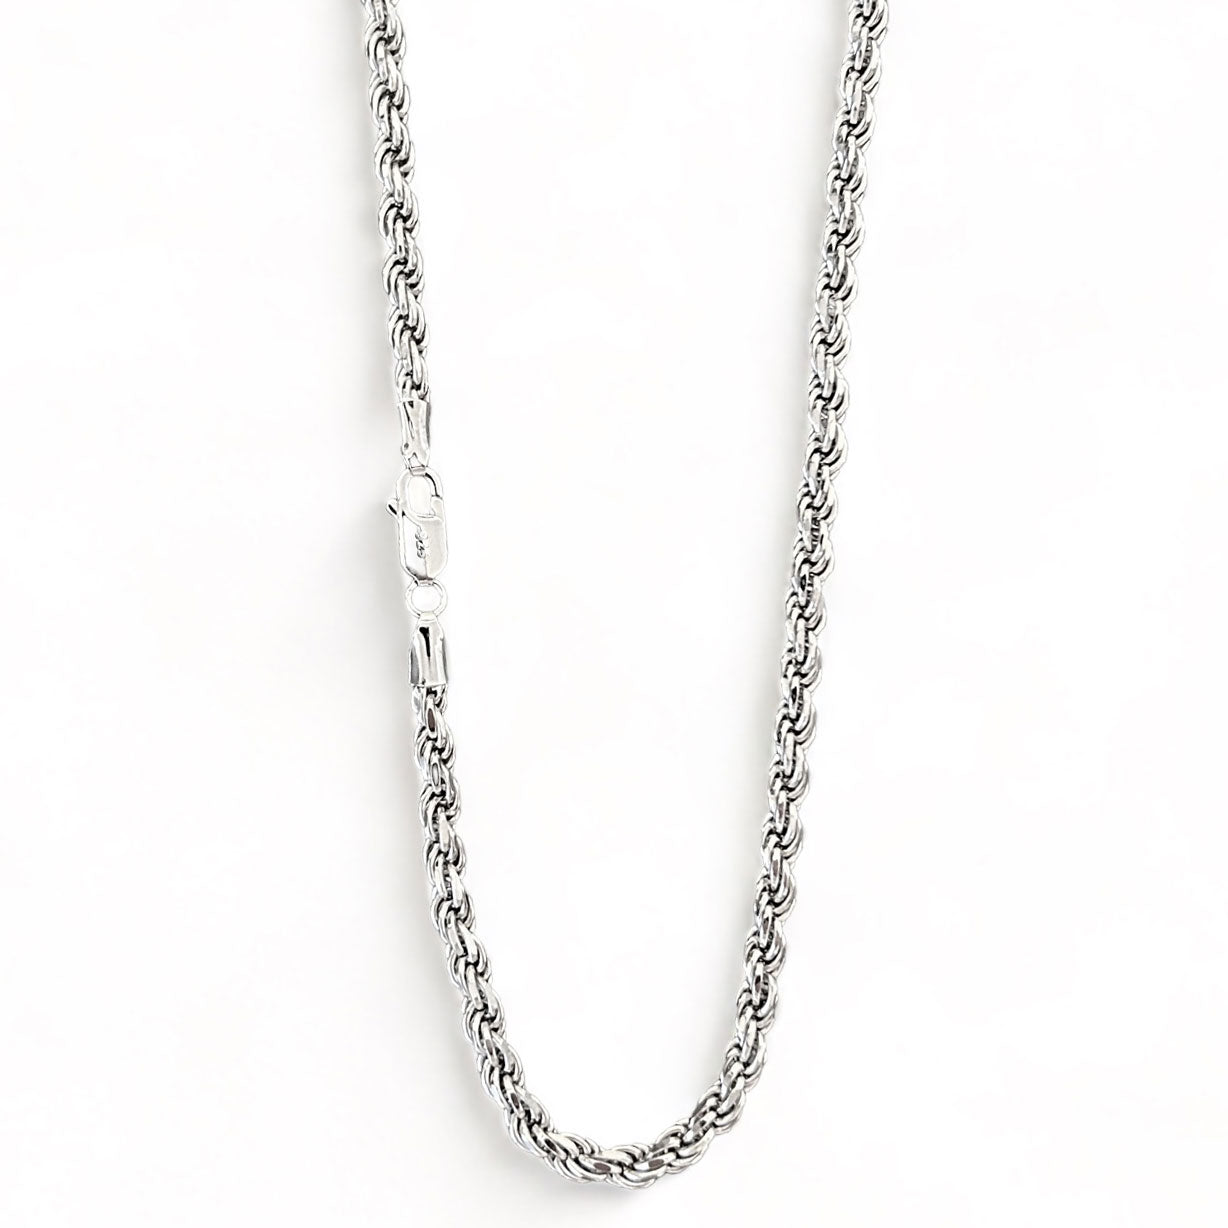 Cord chain Rope Chain 4mm - 925 silver